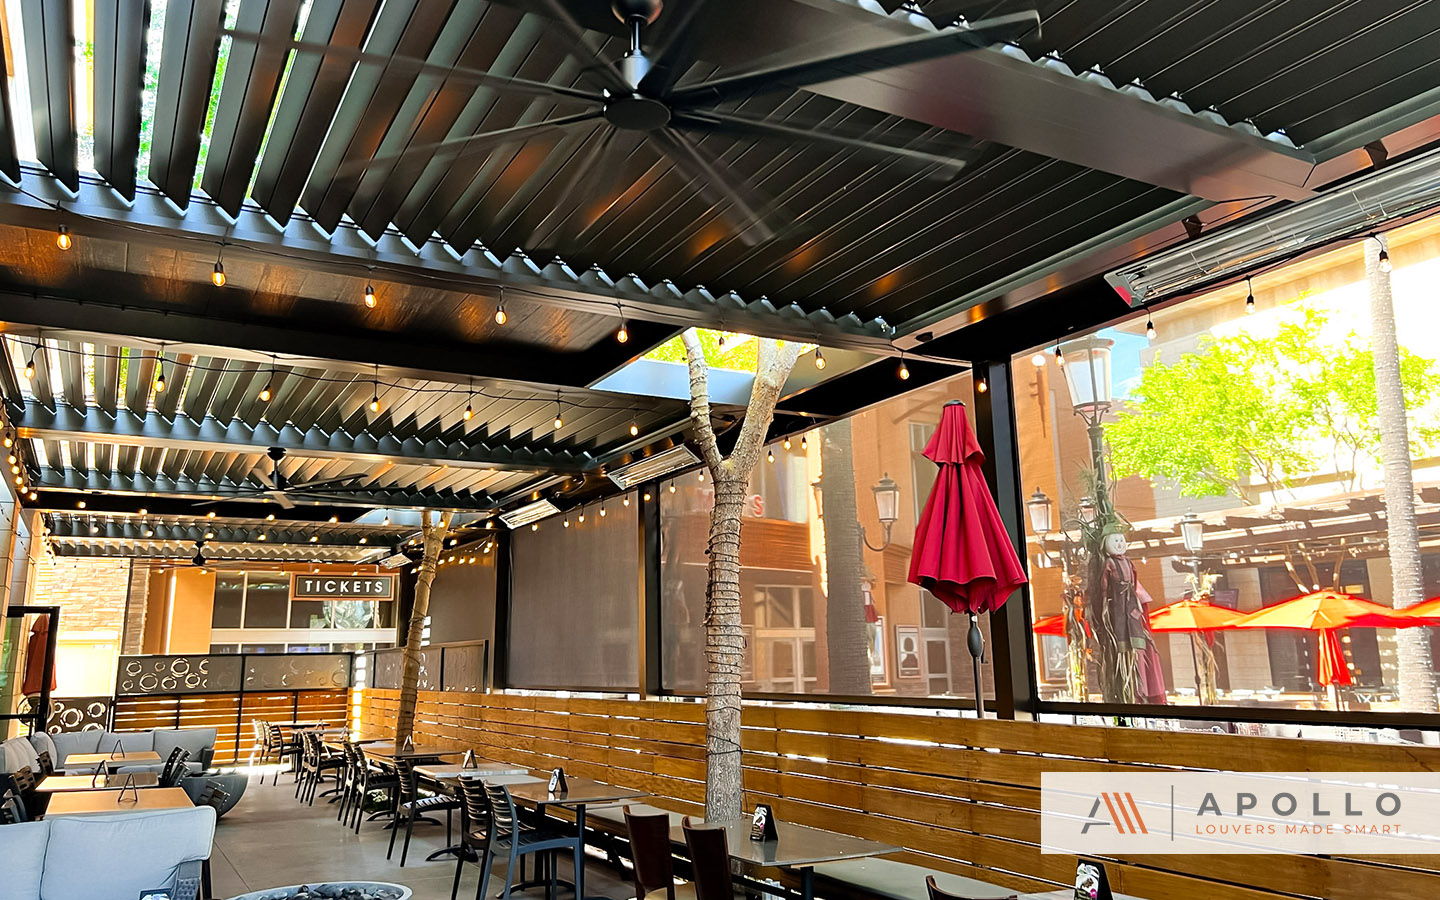 Image of an adjustable louvered pergola providing shade and a comfortable outdoor dining experience at the Back Bistro restaurant.